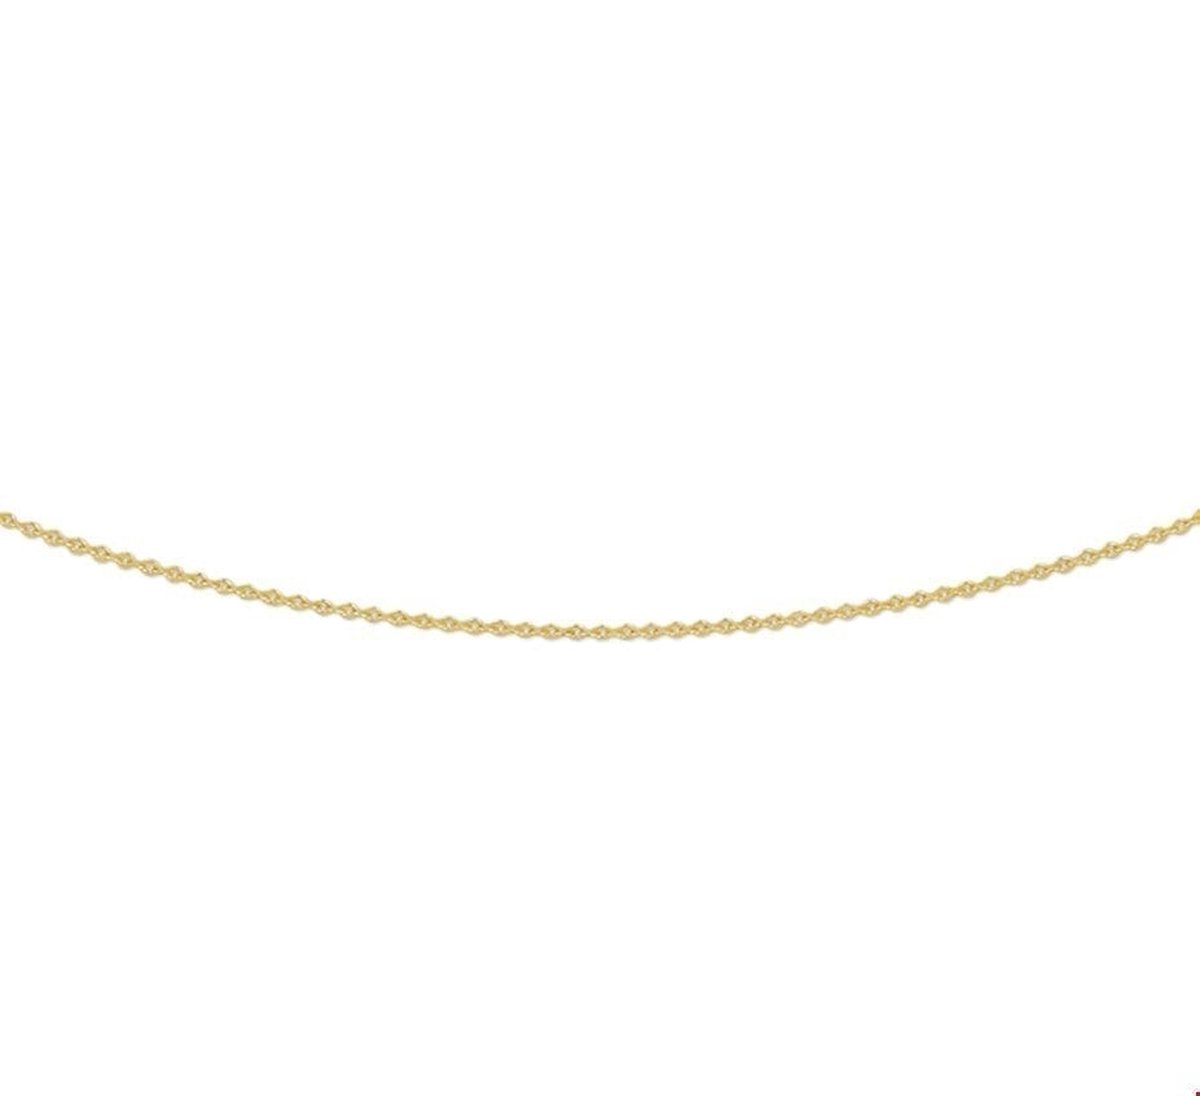 The Jewelry Collection Ketting Anker Plat 0,8 mm 42 cm - Goud - Huiscollectie